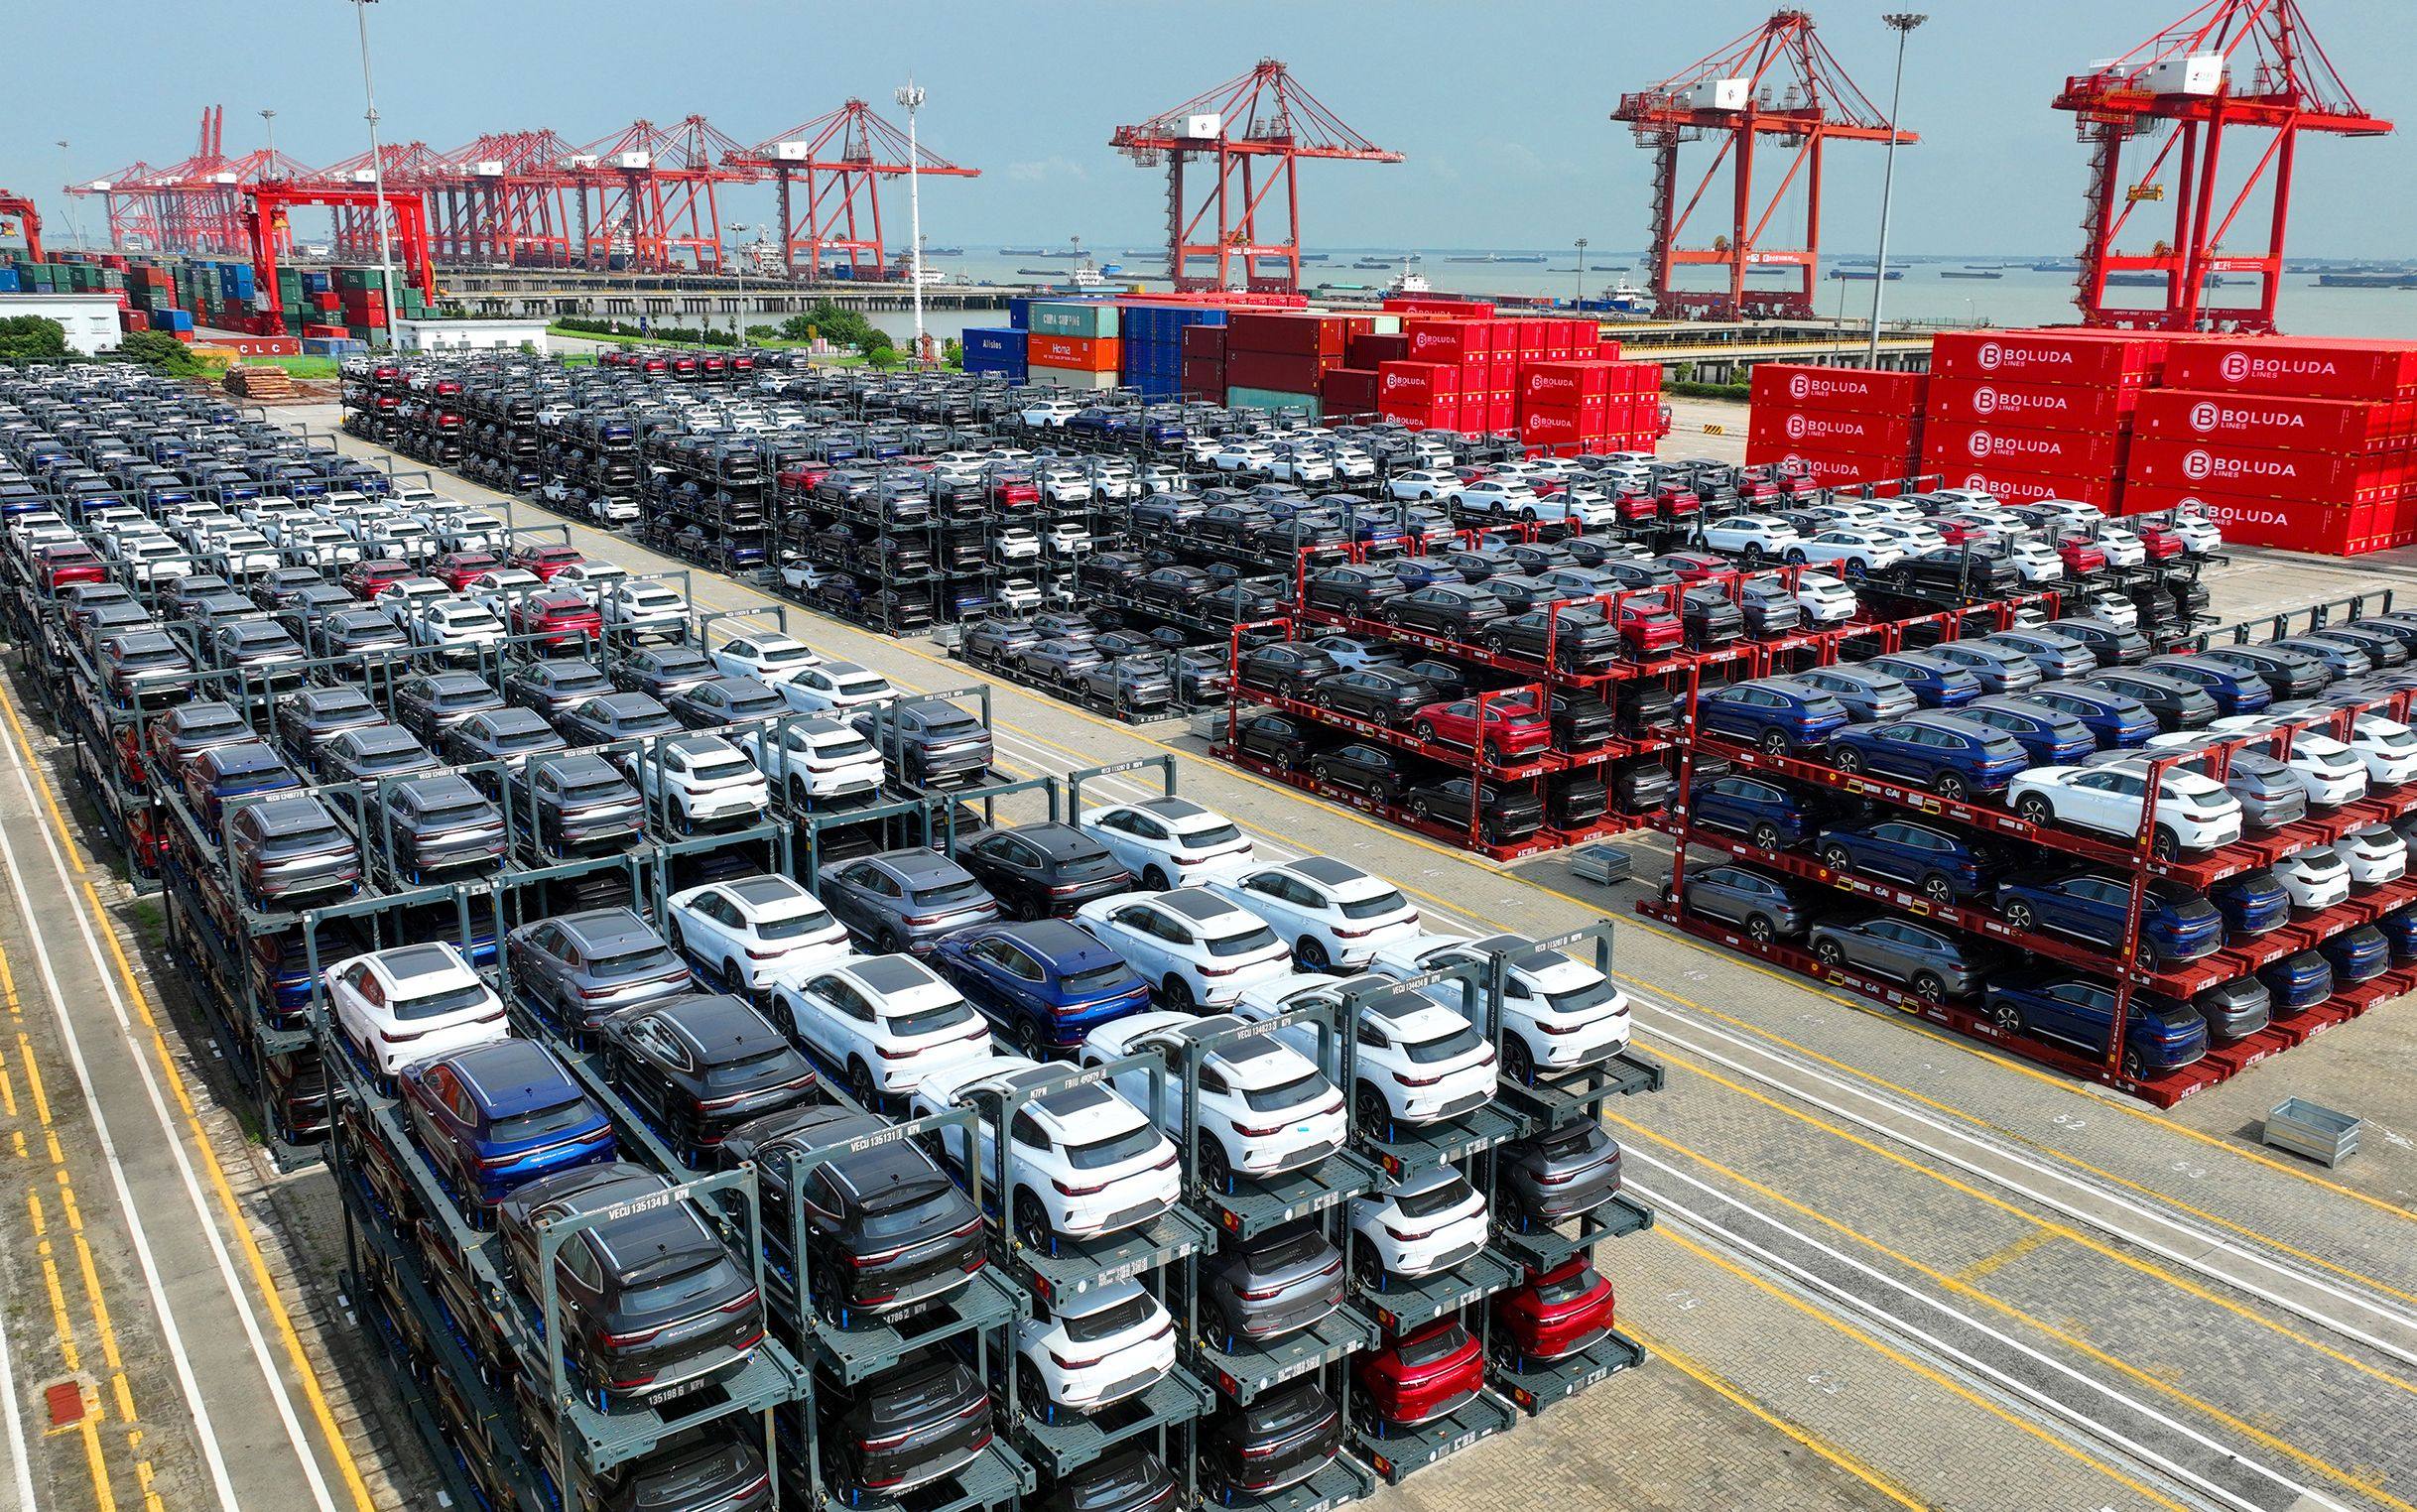 BYD electric cars are lined up waiting to be shipped from China’s Suzhou Port on September 11. Chinese brands now account for about half of EVs sold globally. Photo: AFP